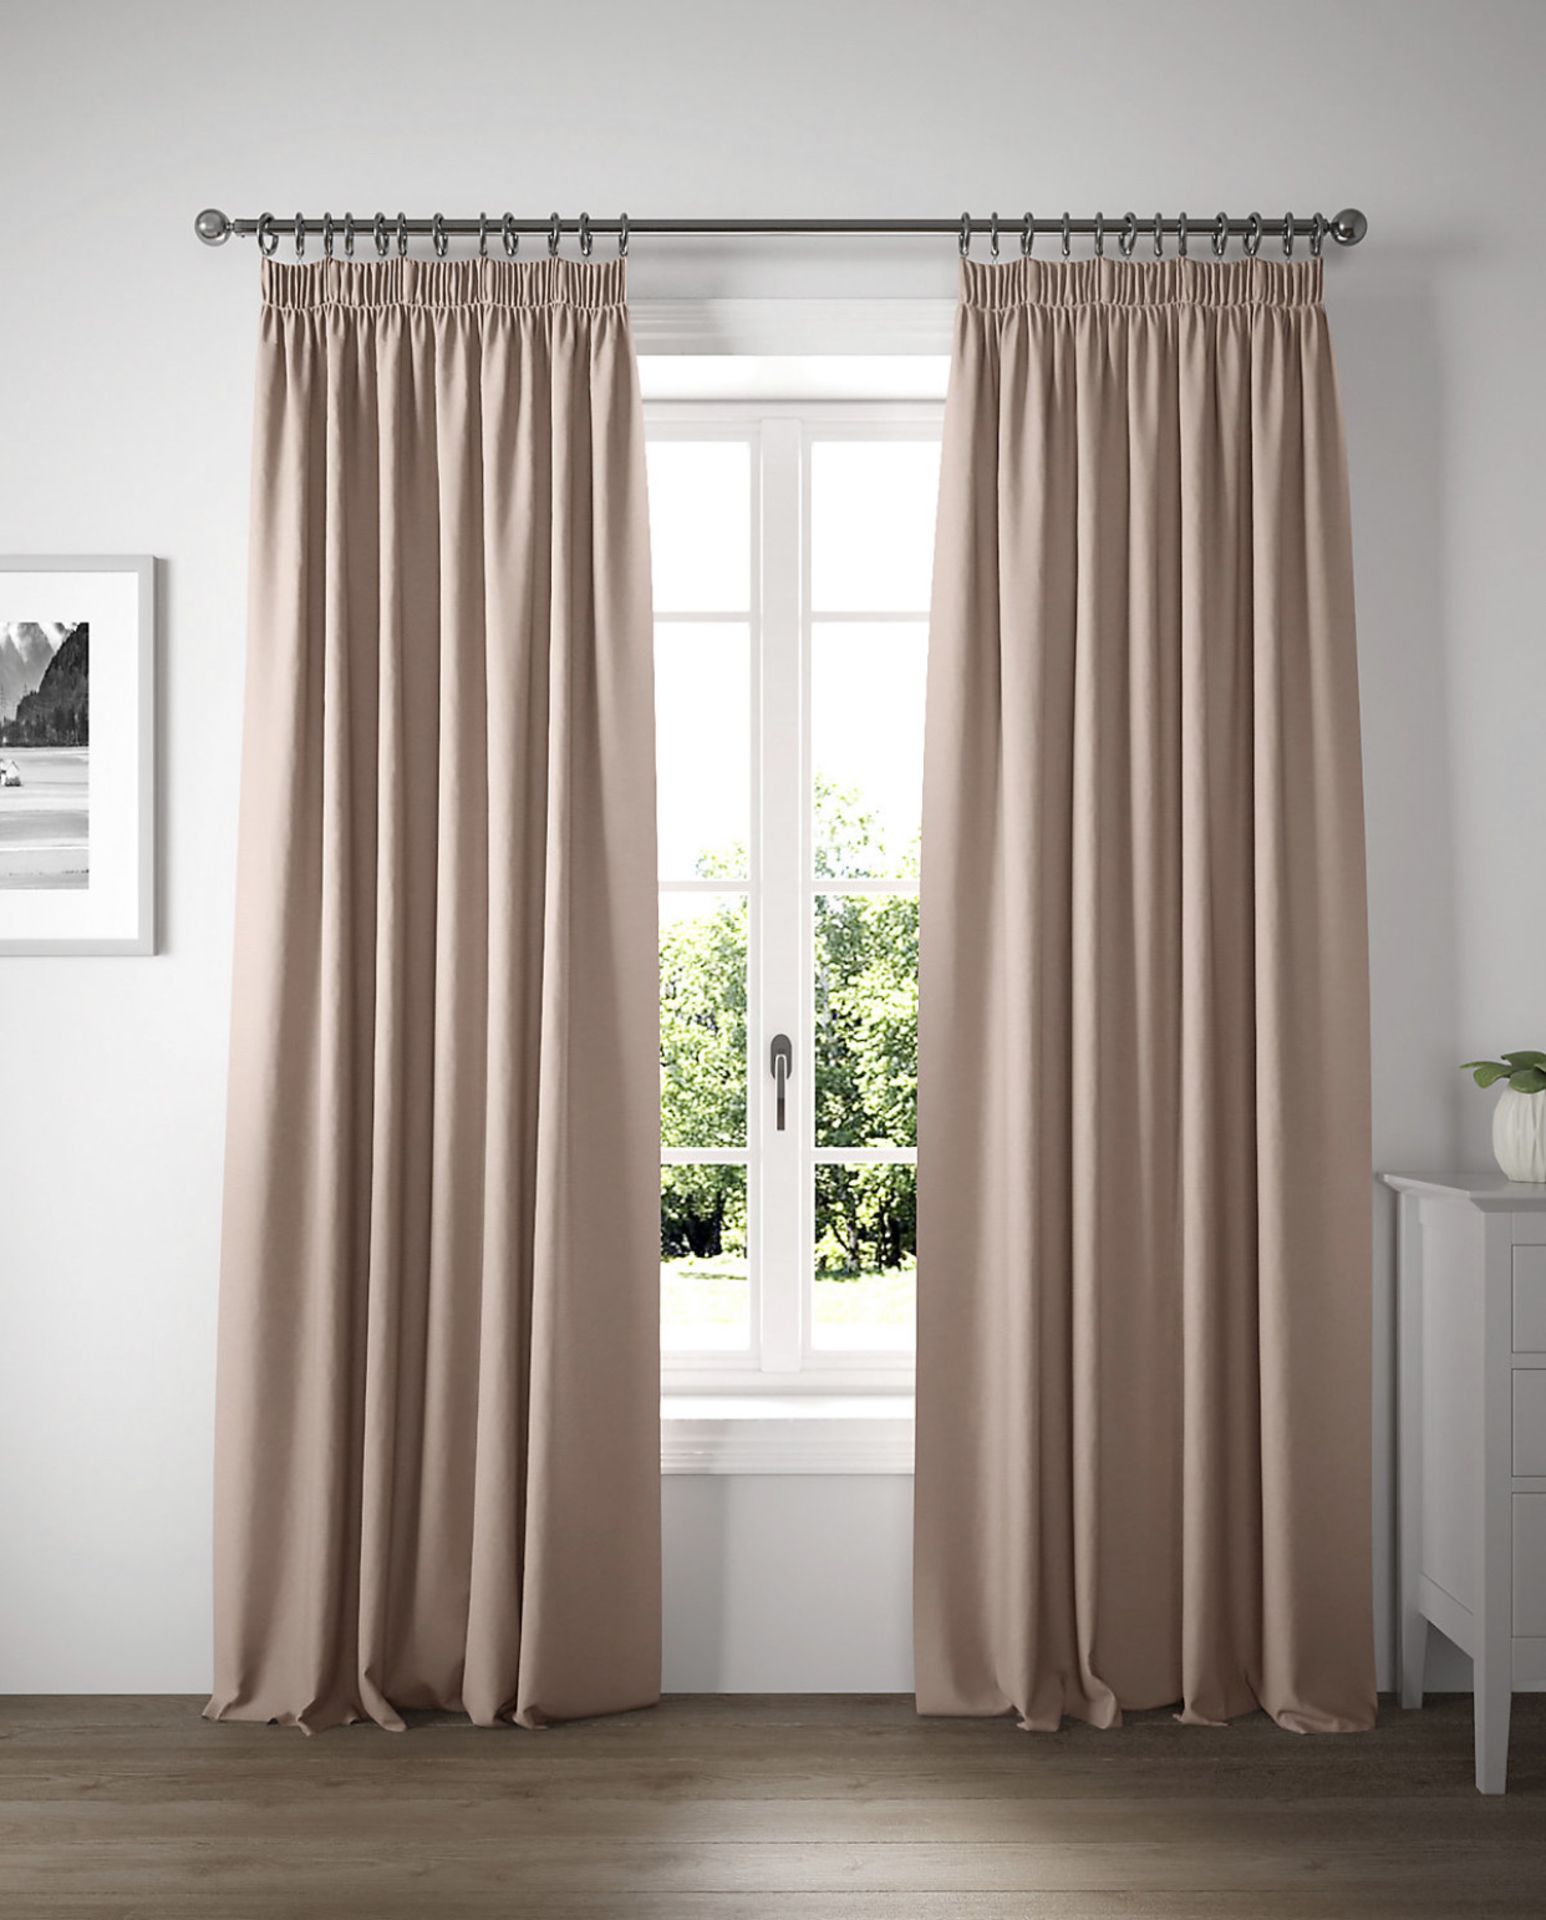 Thermal Pencil Pleat Blackout Curtains RRP £89